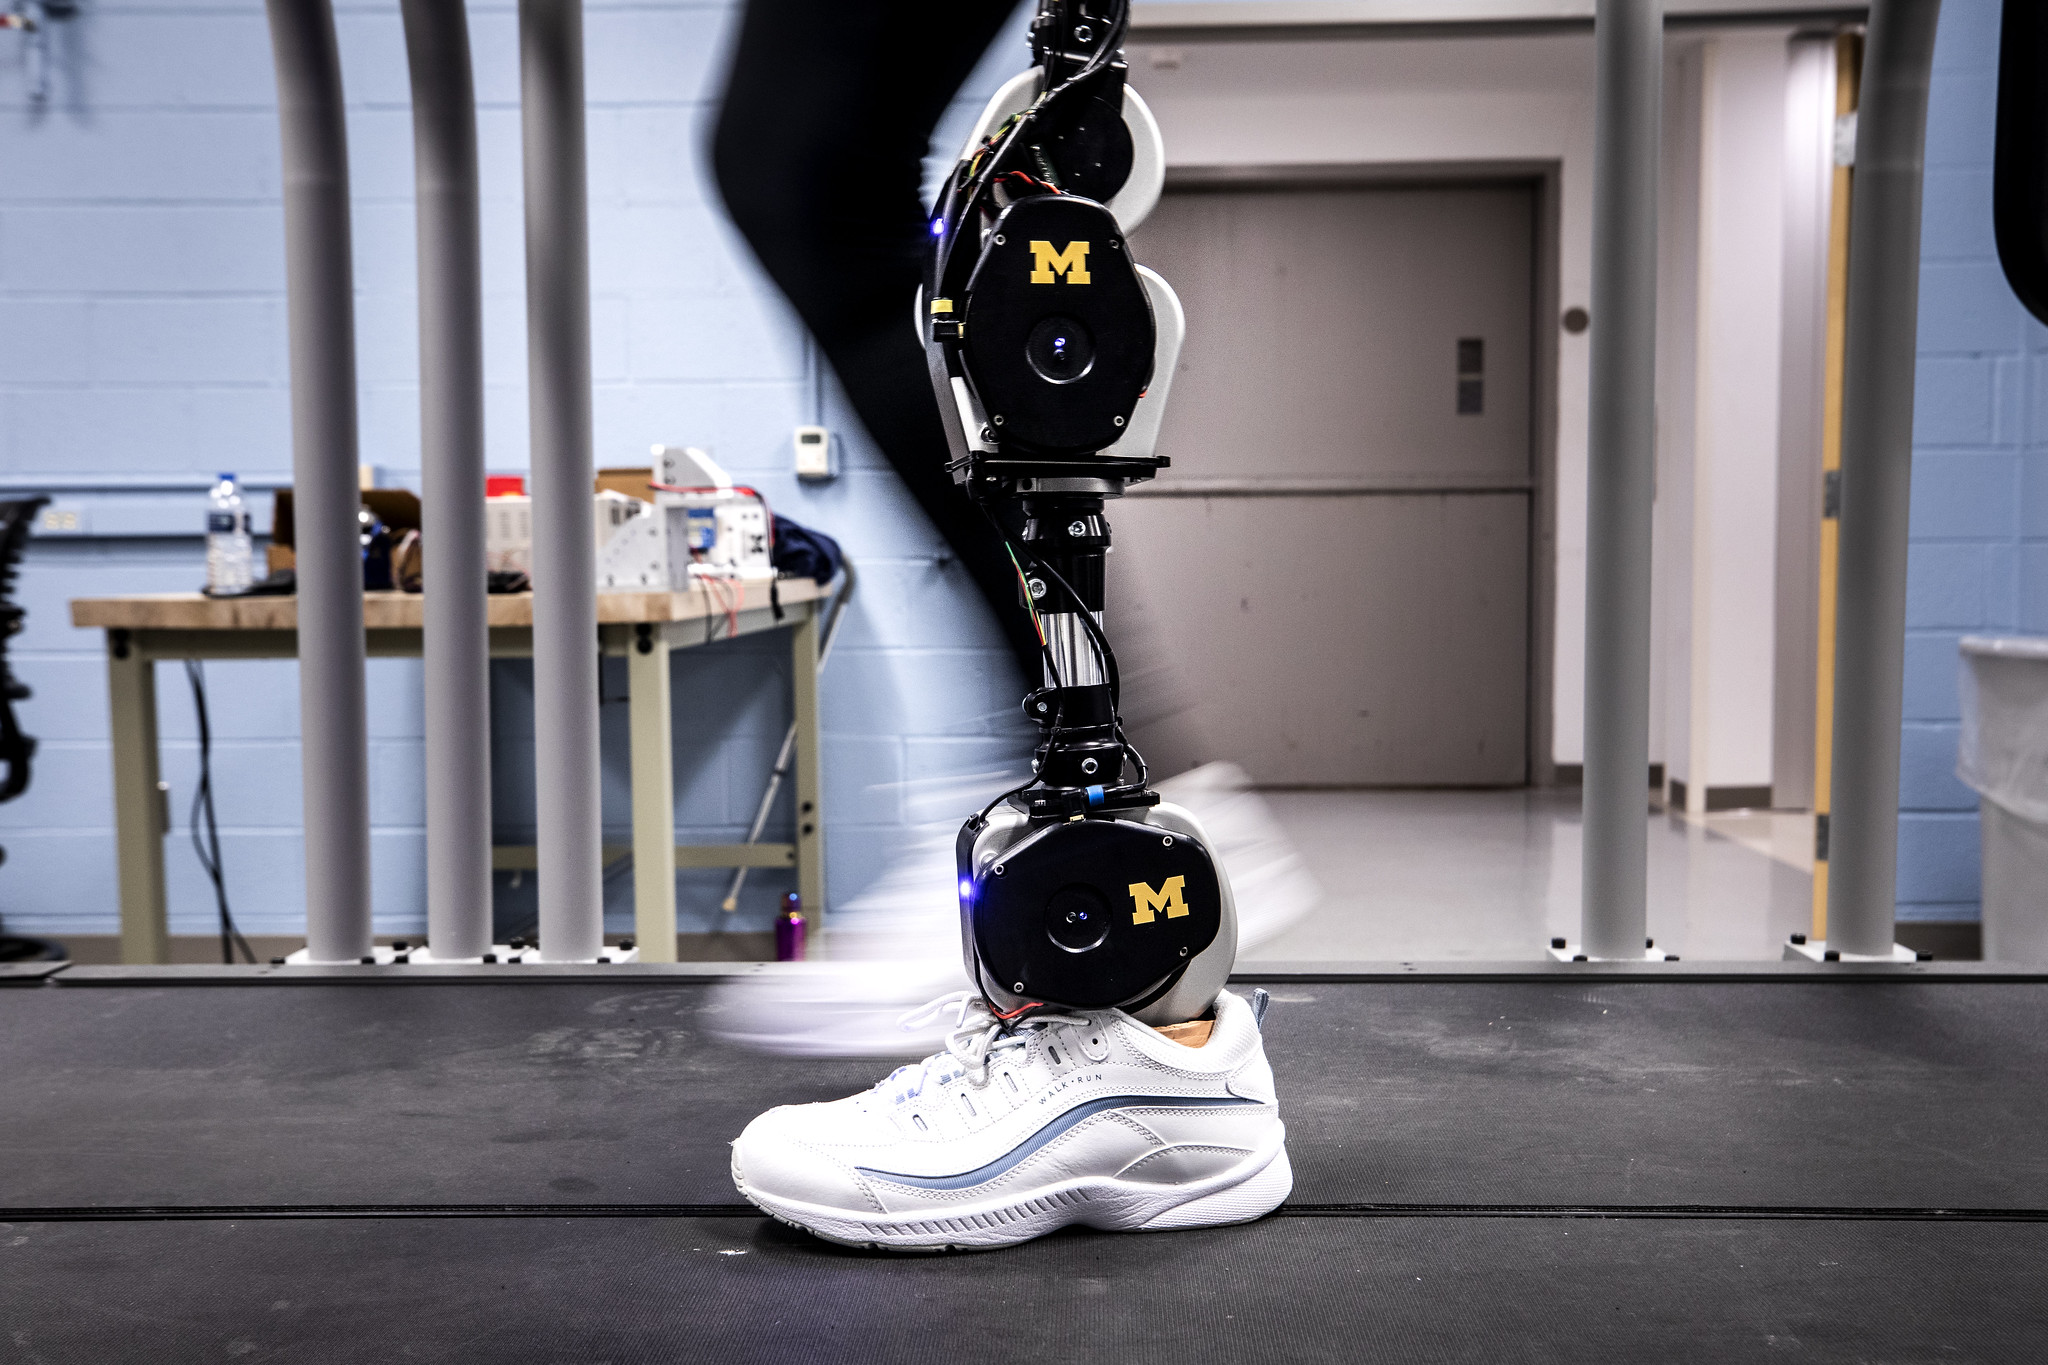 Open Source Bionic Leg First Of Its Kind Platform Aims To Rapidly